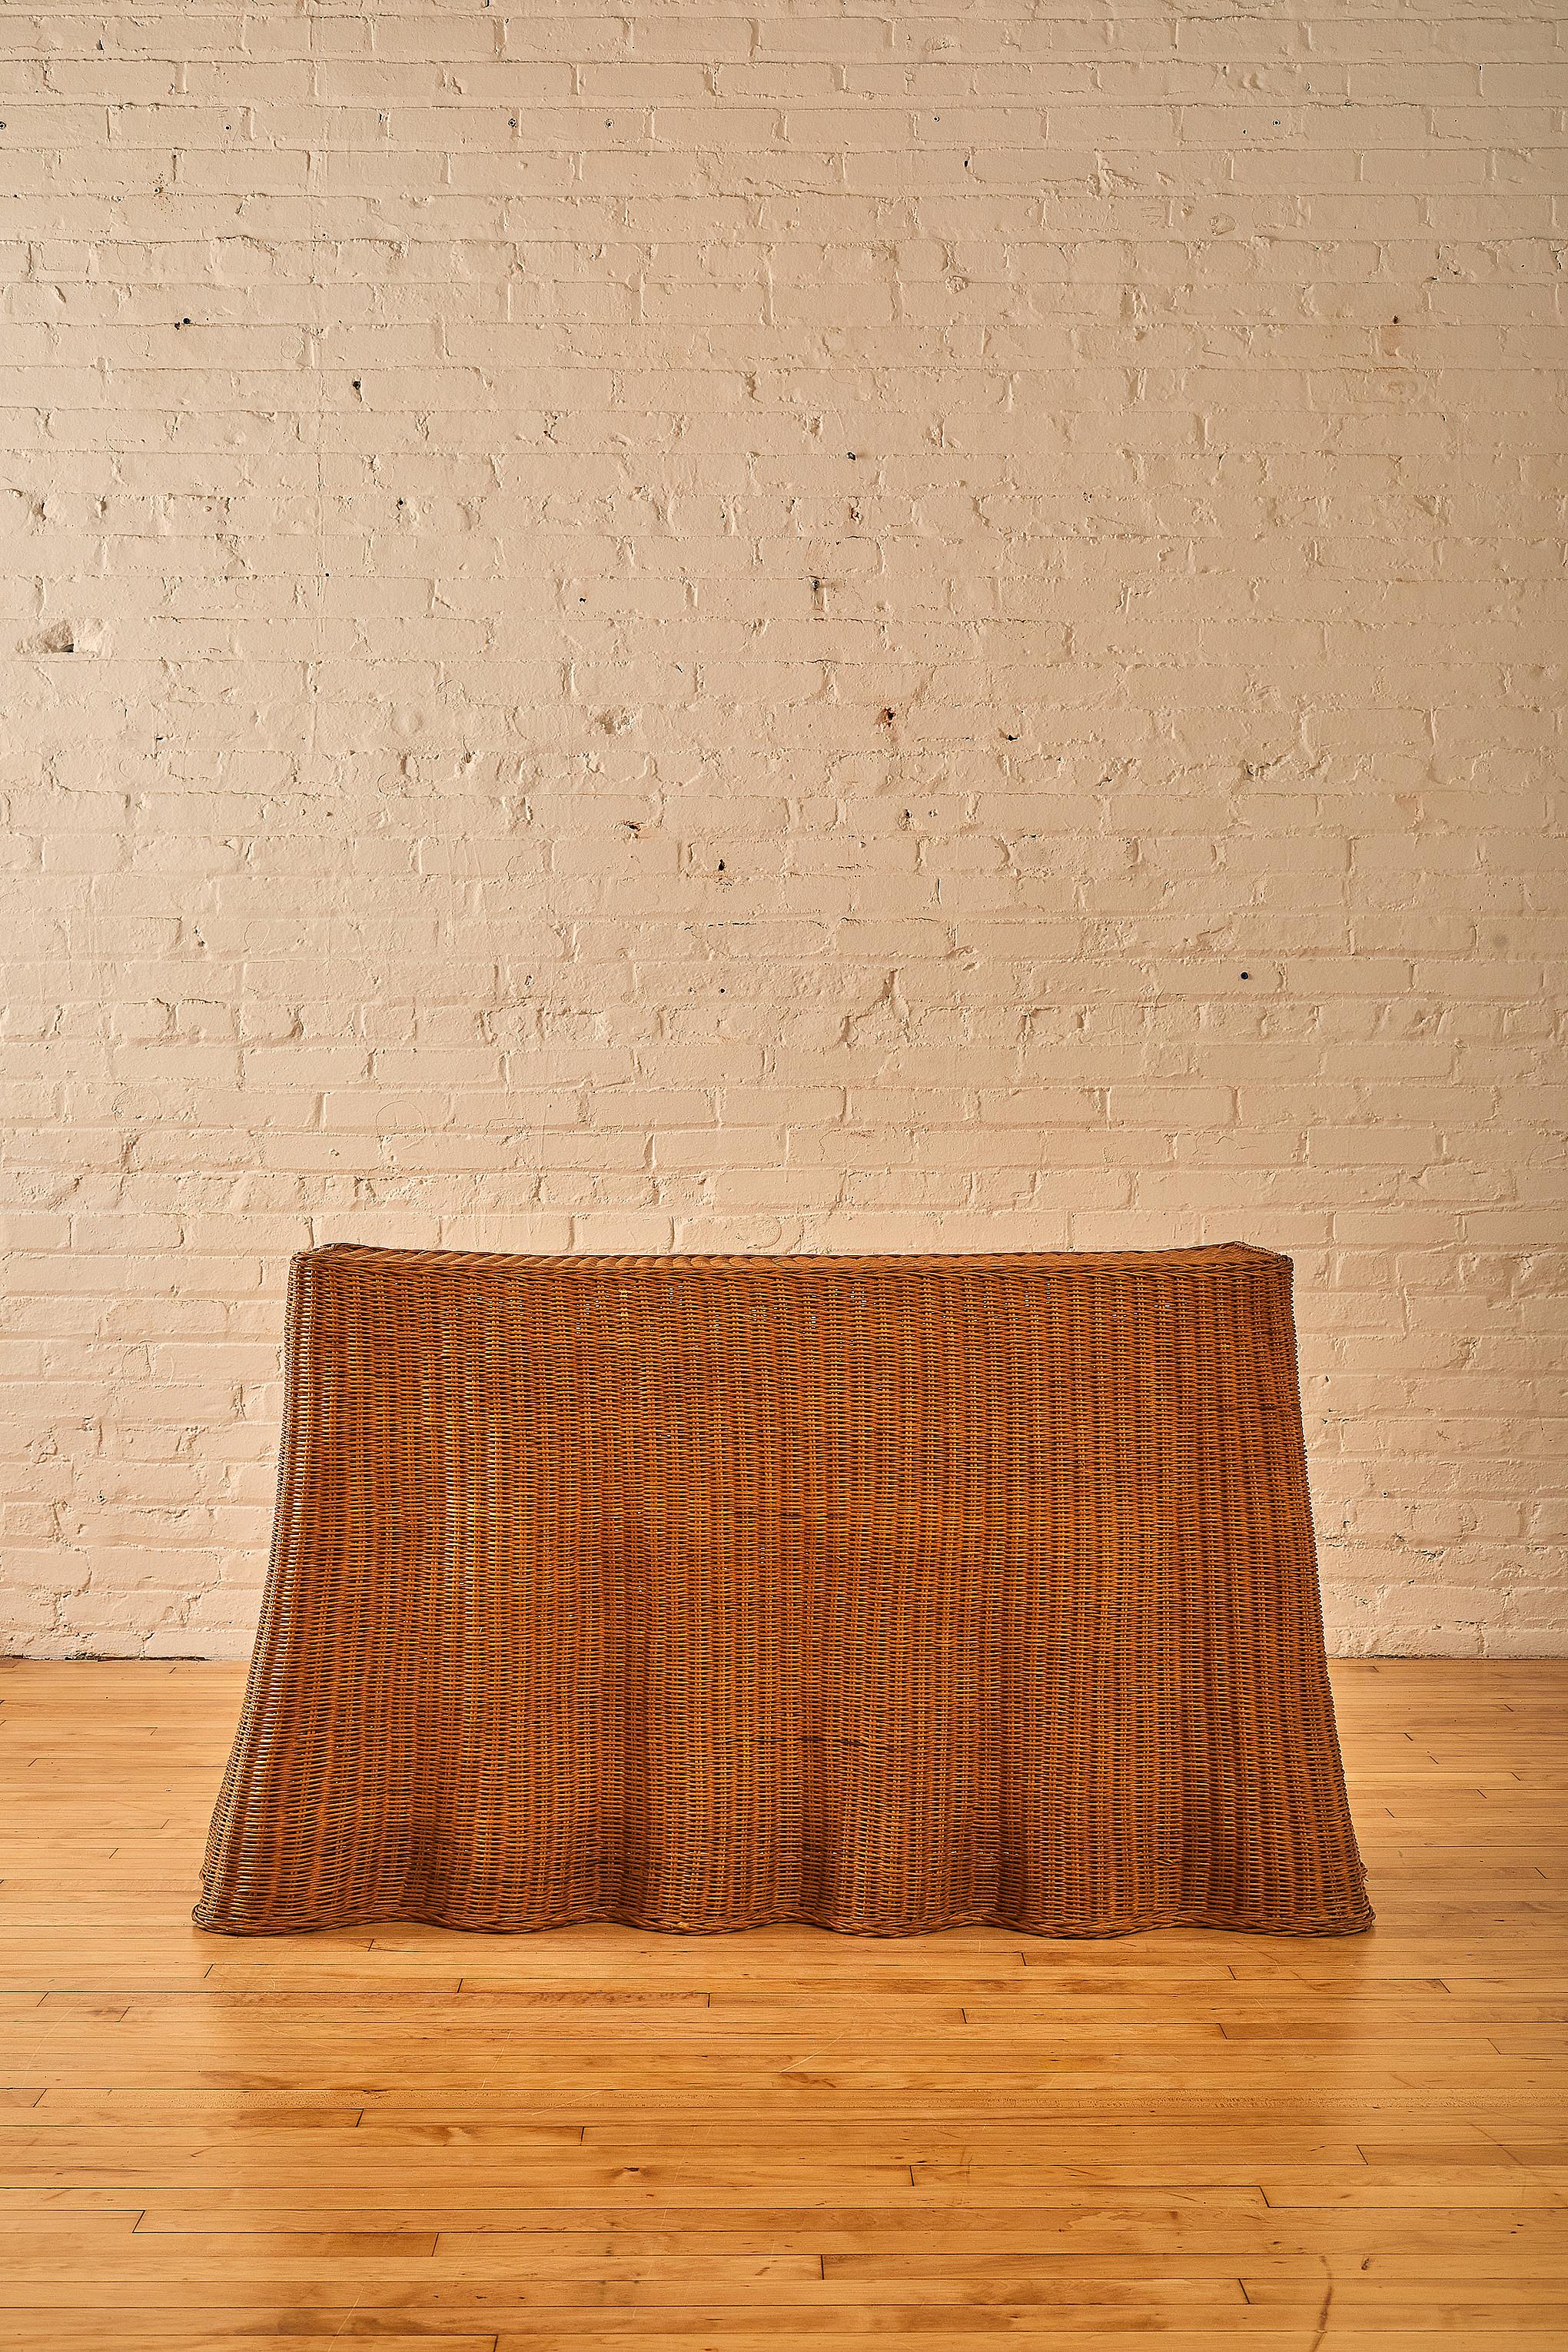 A fine wicker console table with a billowing drape on the bottom edge.

